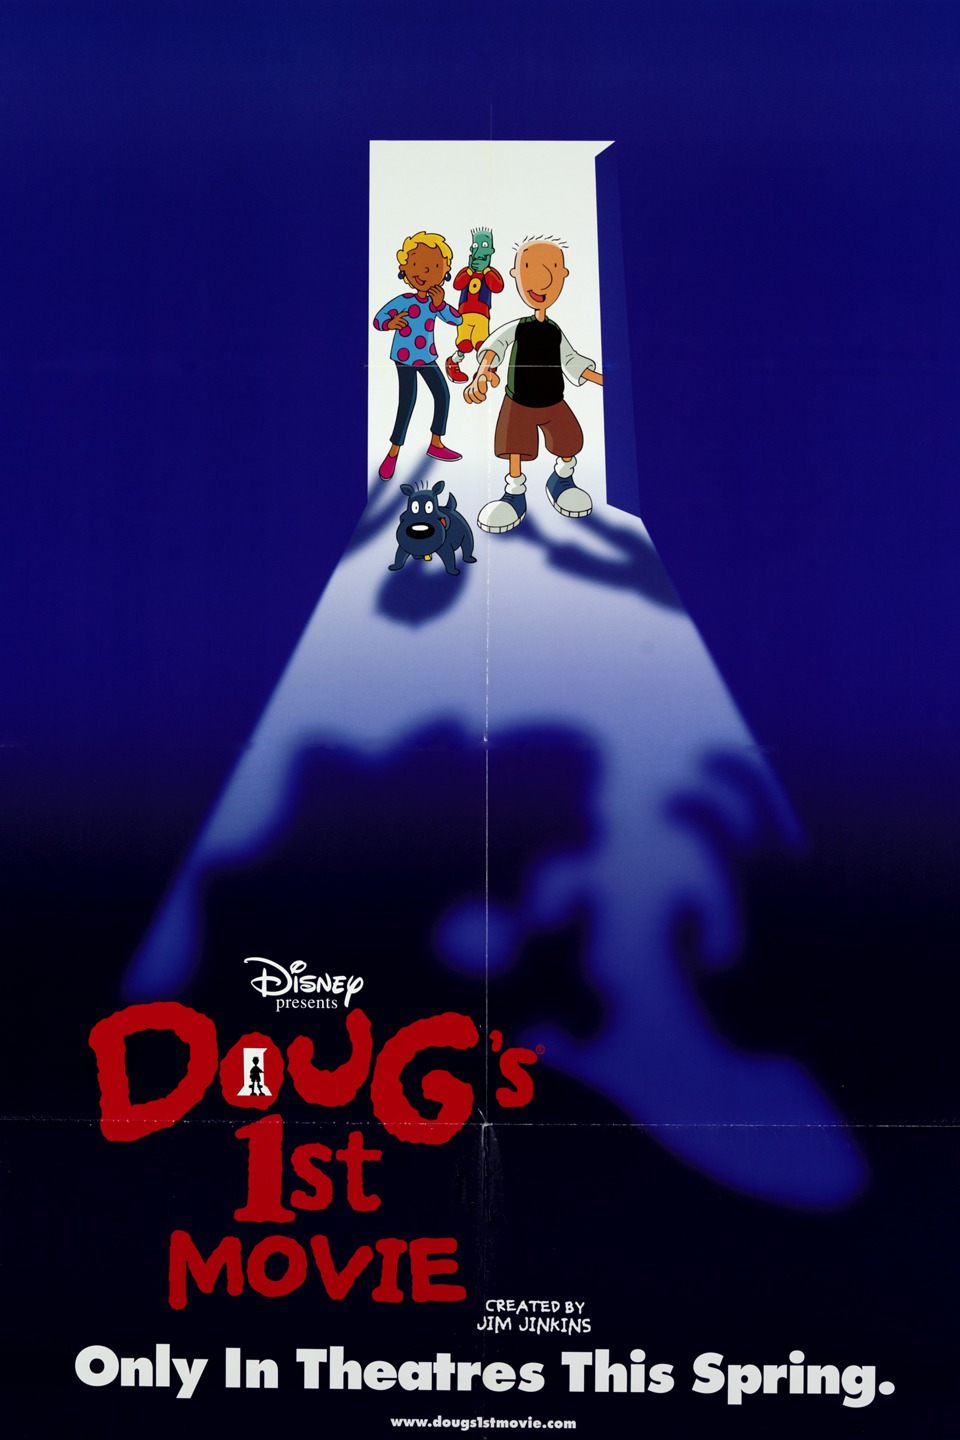 Extra Large Movie Poster Image for Doug's 1st Movie 